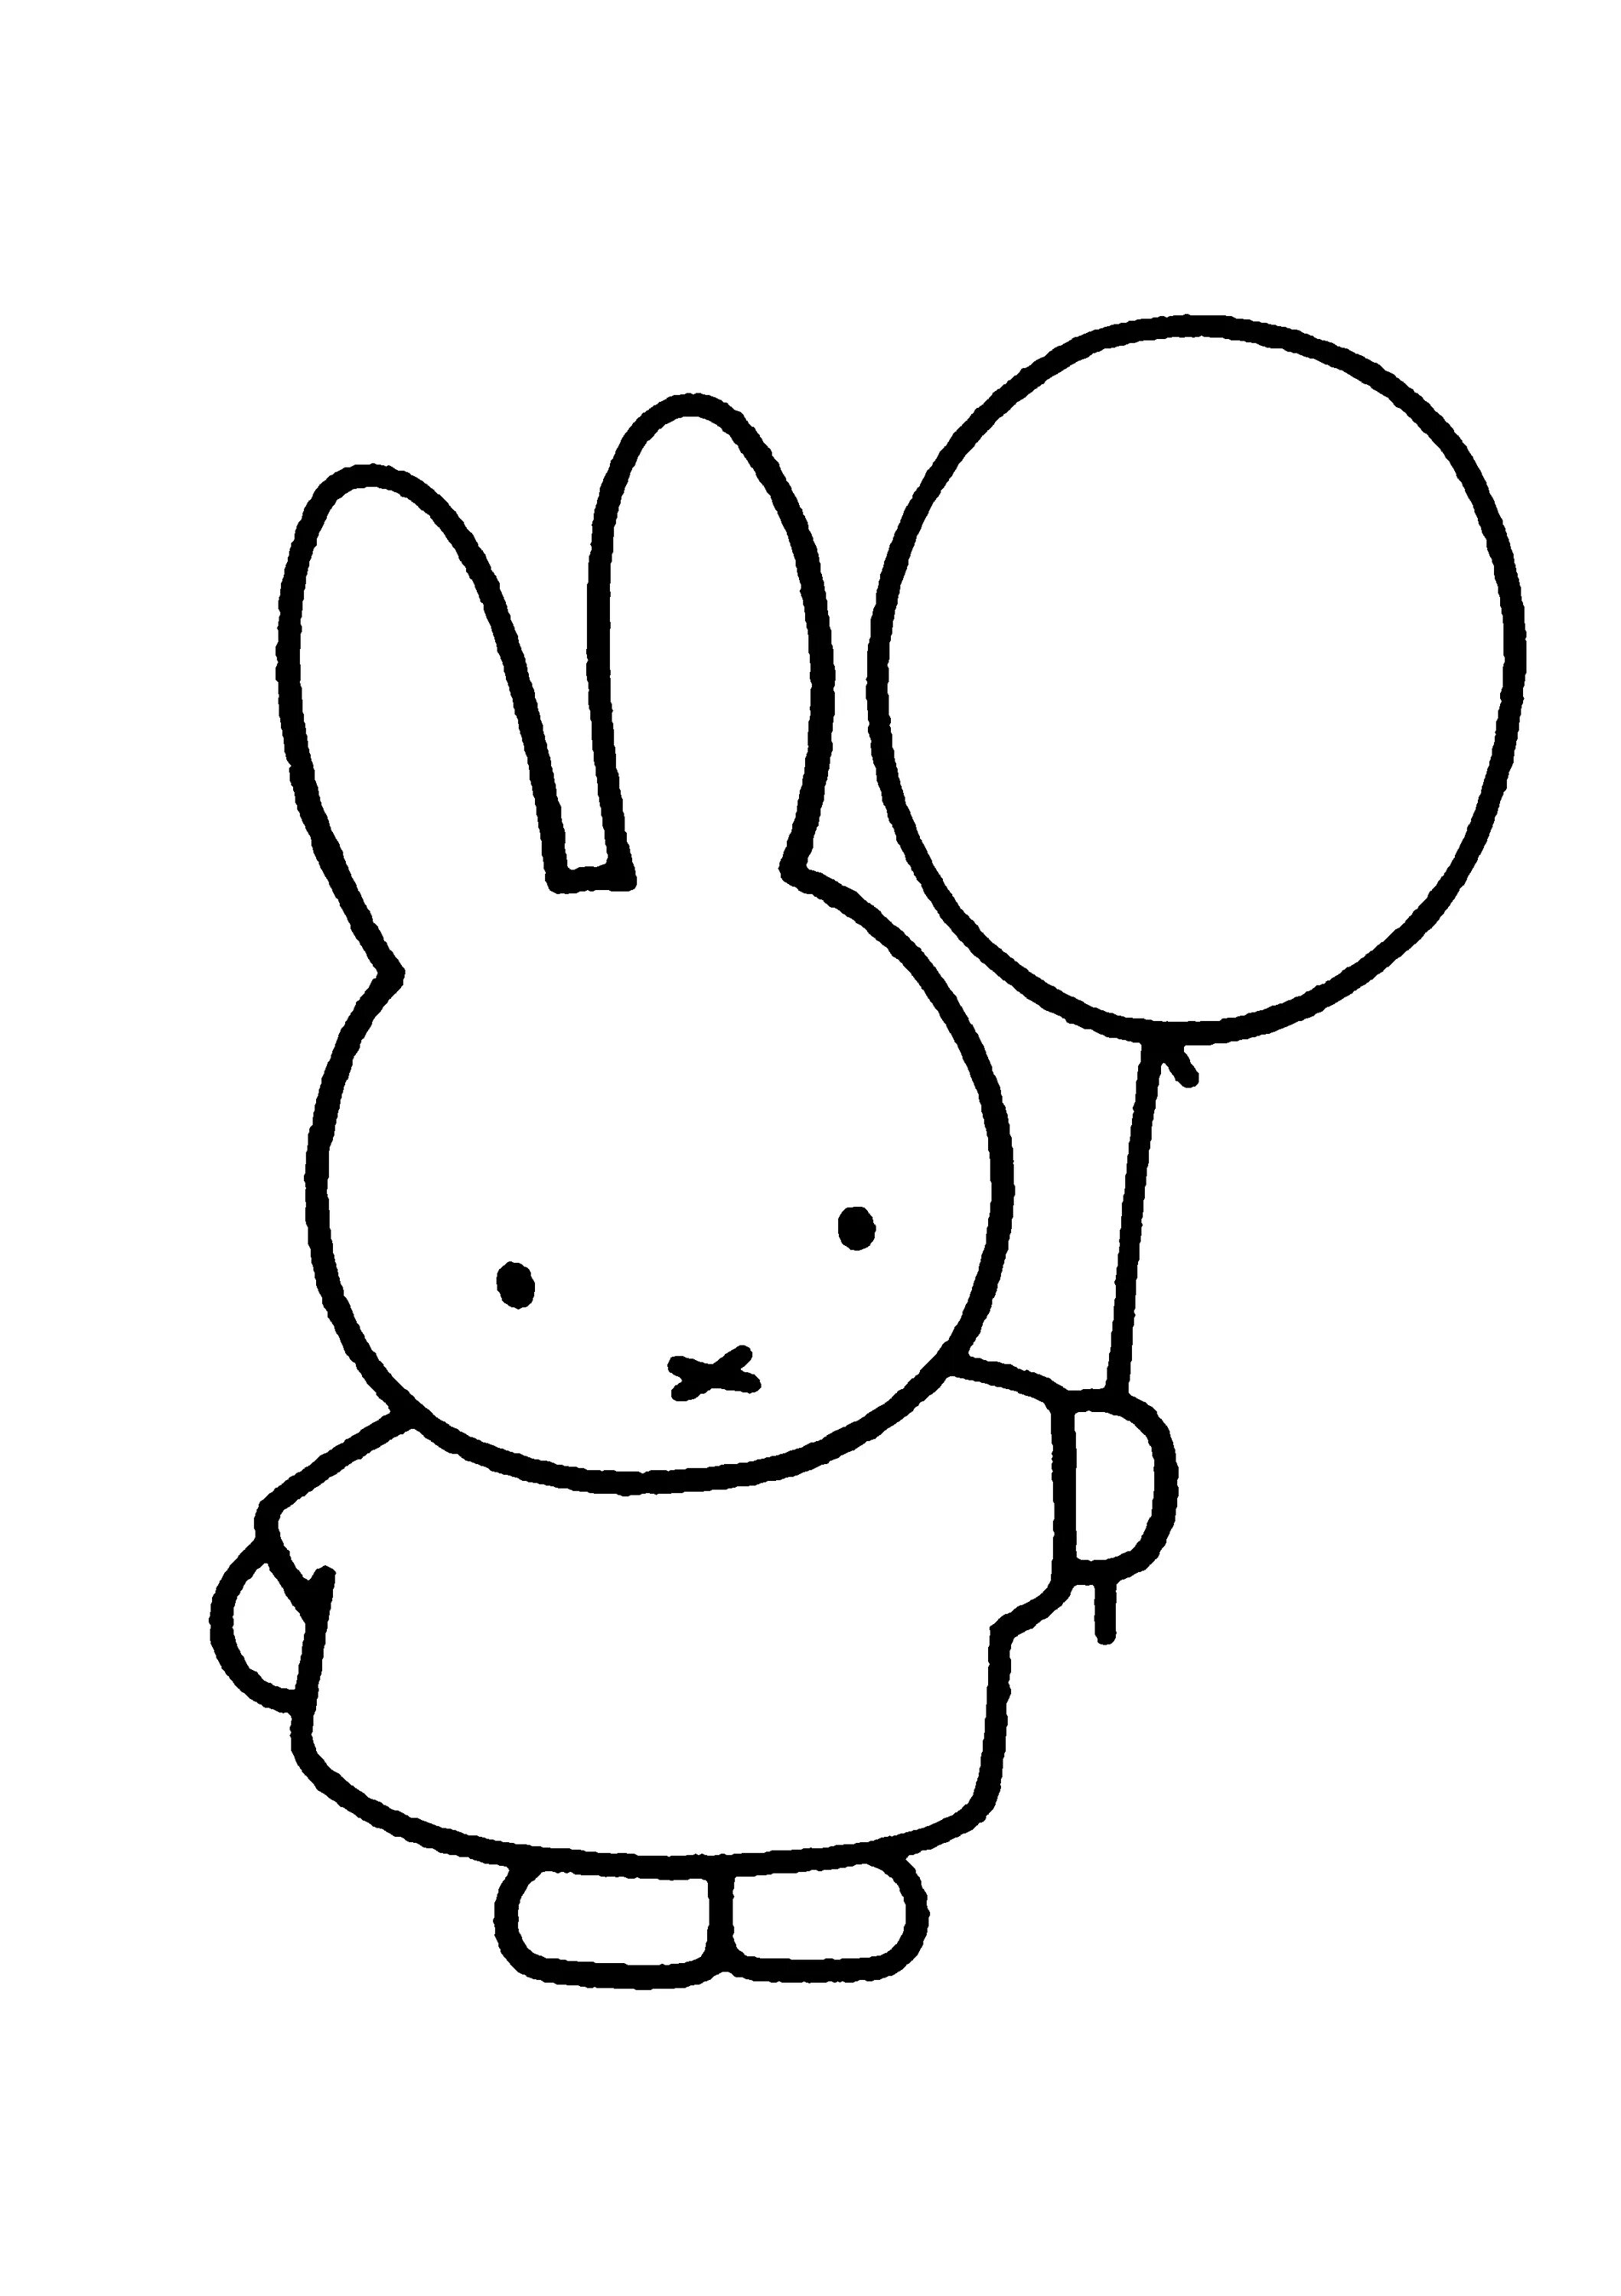 Bunny with balloons #5